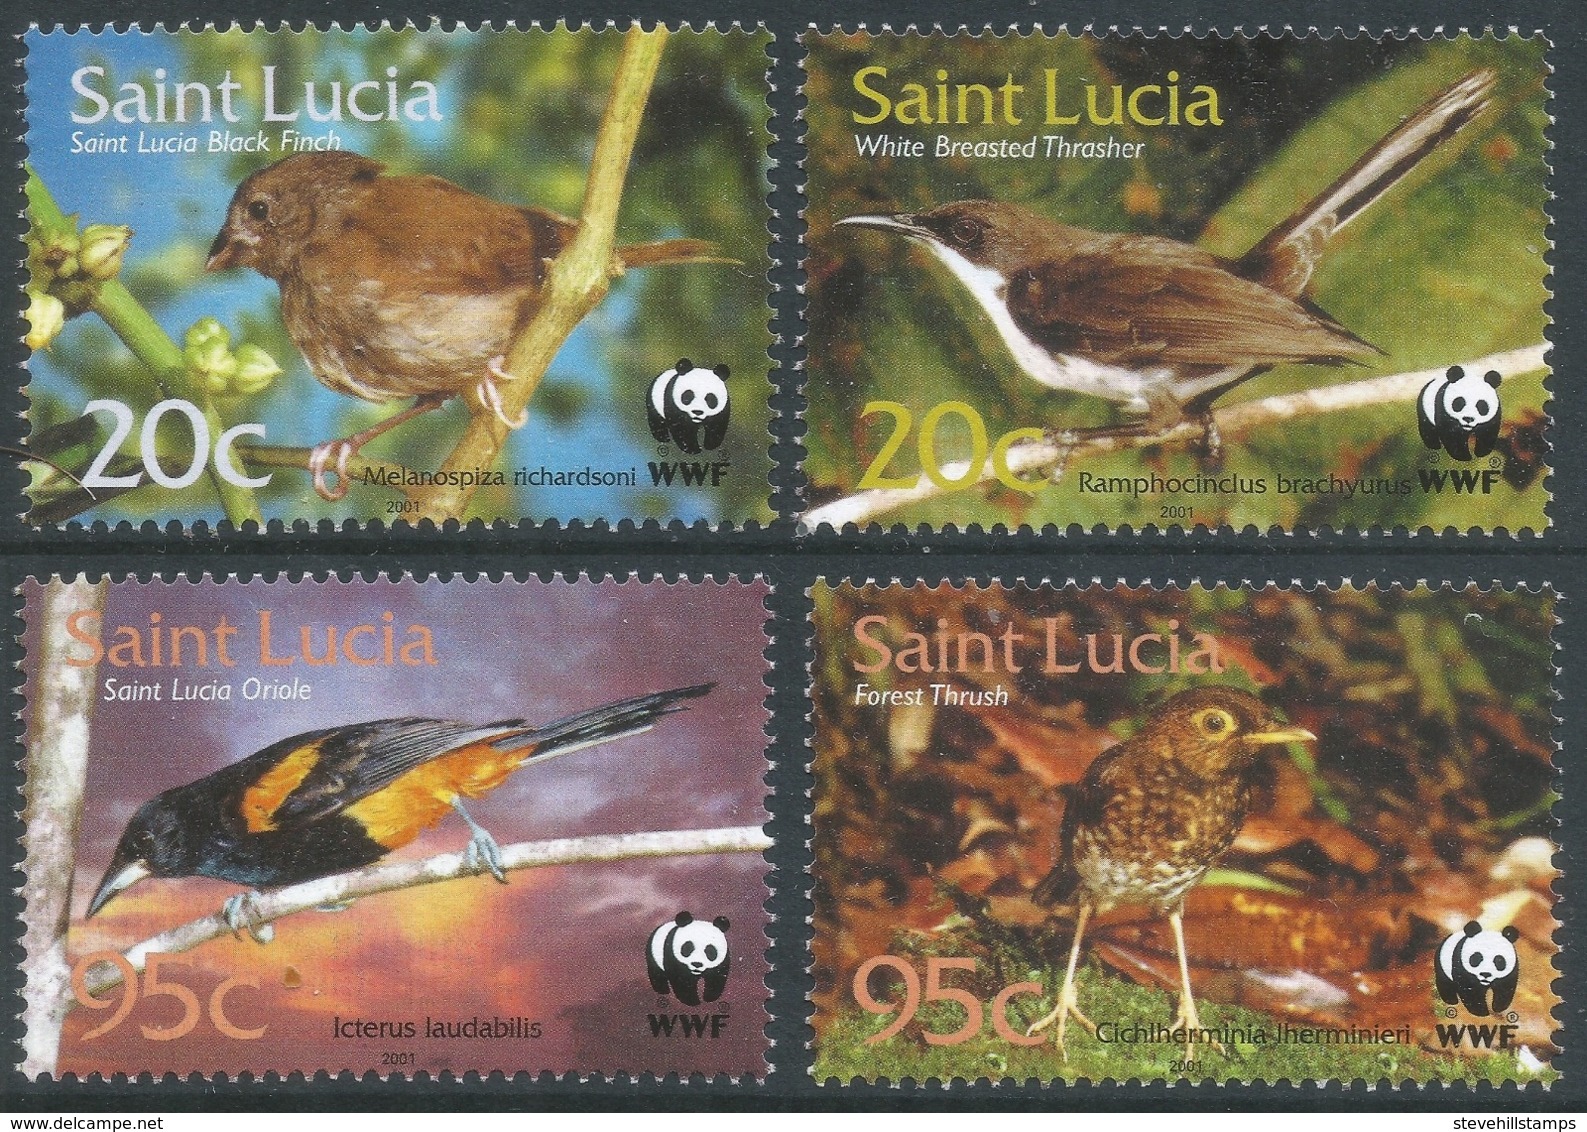 St Lucia. 2001 Endangered Species. Birds Of St Lucia. MNH Complete Set. SG 1242-1245 - St.Lucia (1979-...)